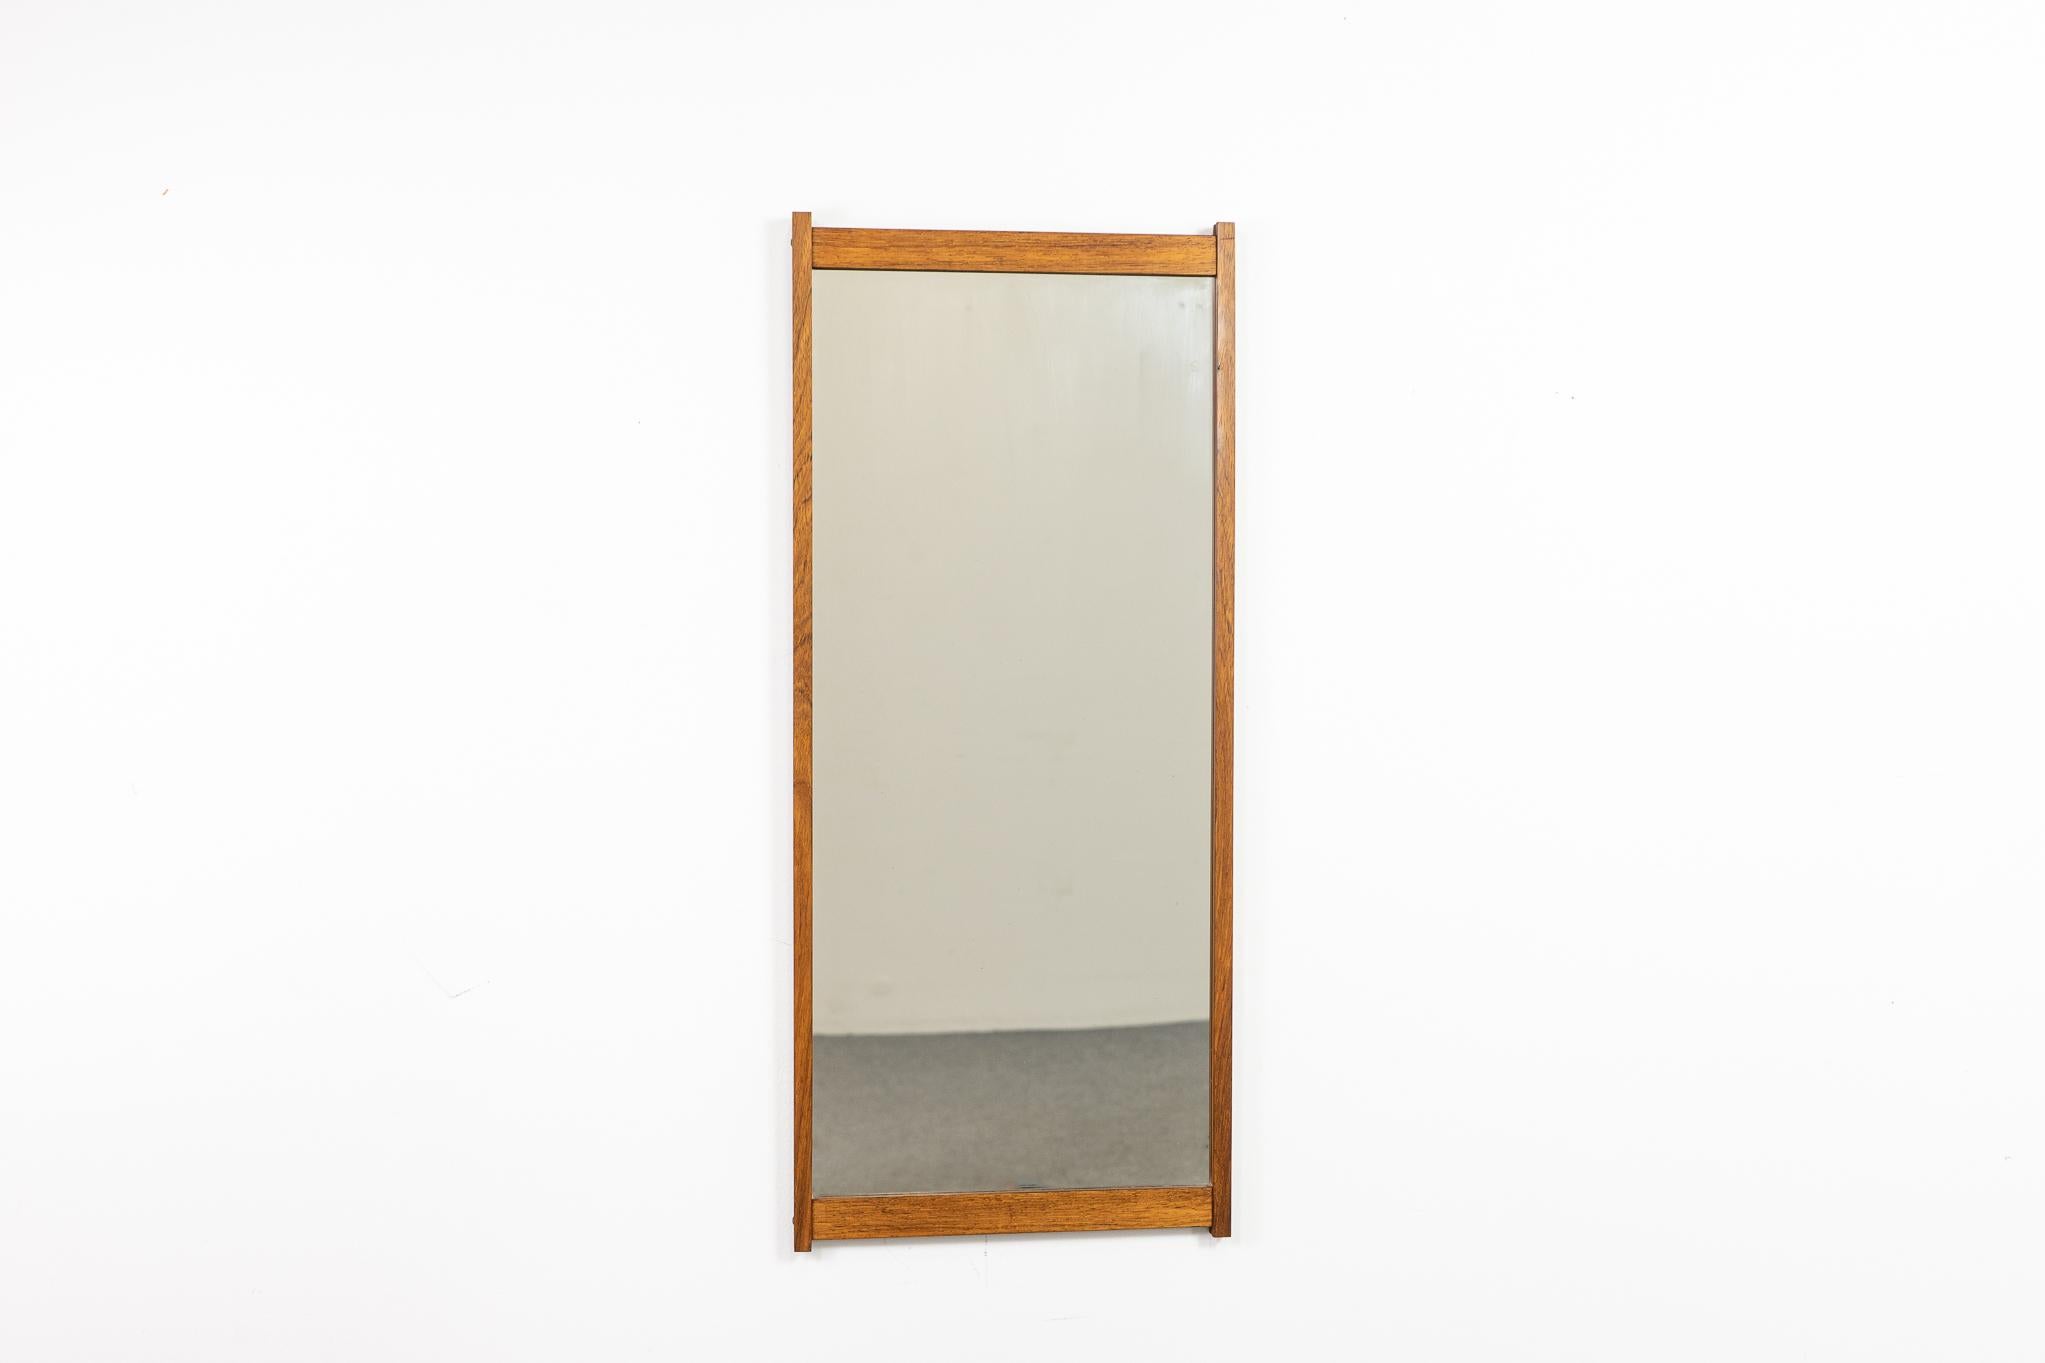 Teak mid-century mirror, circa 1960's. Warm tone, stunning grain and patina, original glass. Clean compact design, not your average rectangle!

Please inquire for international and remote shipping rates.